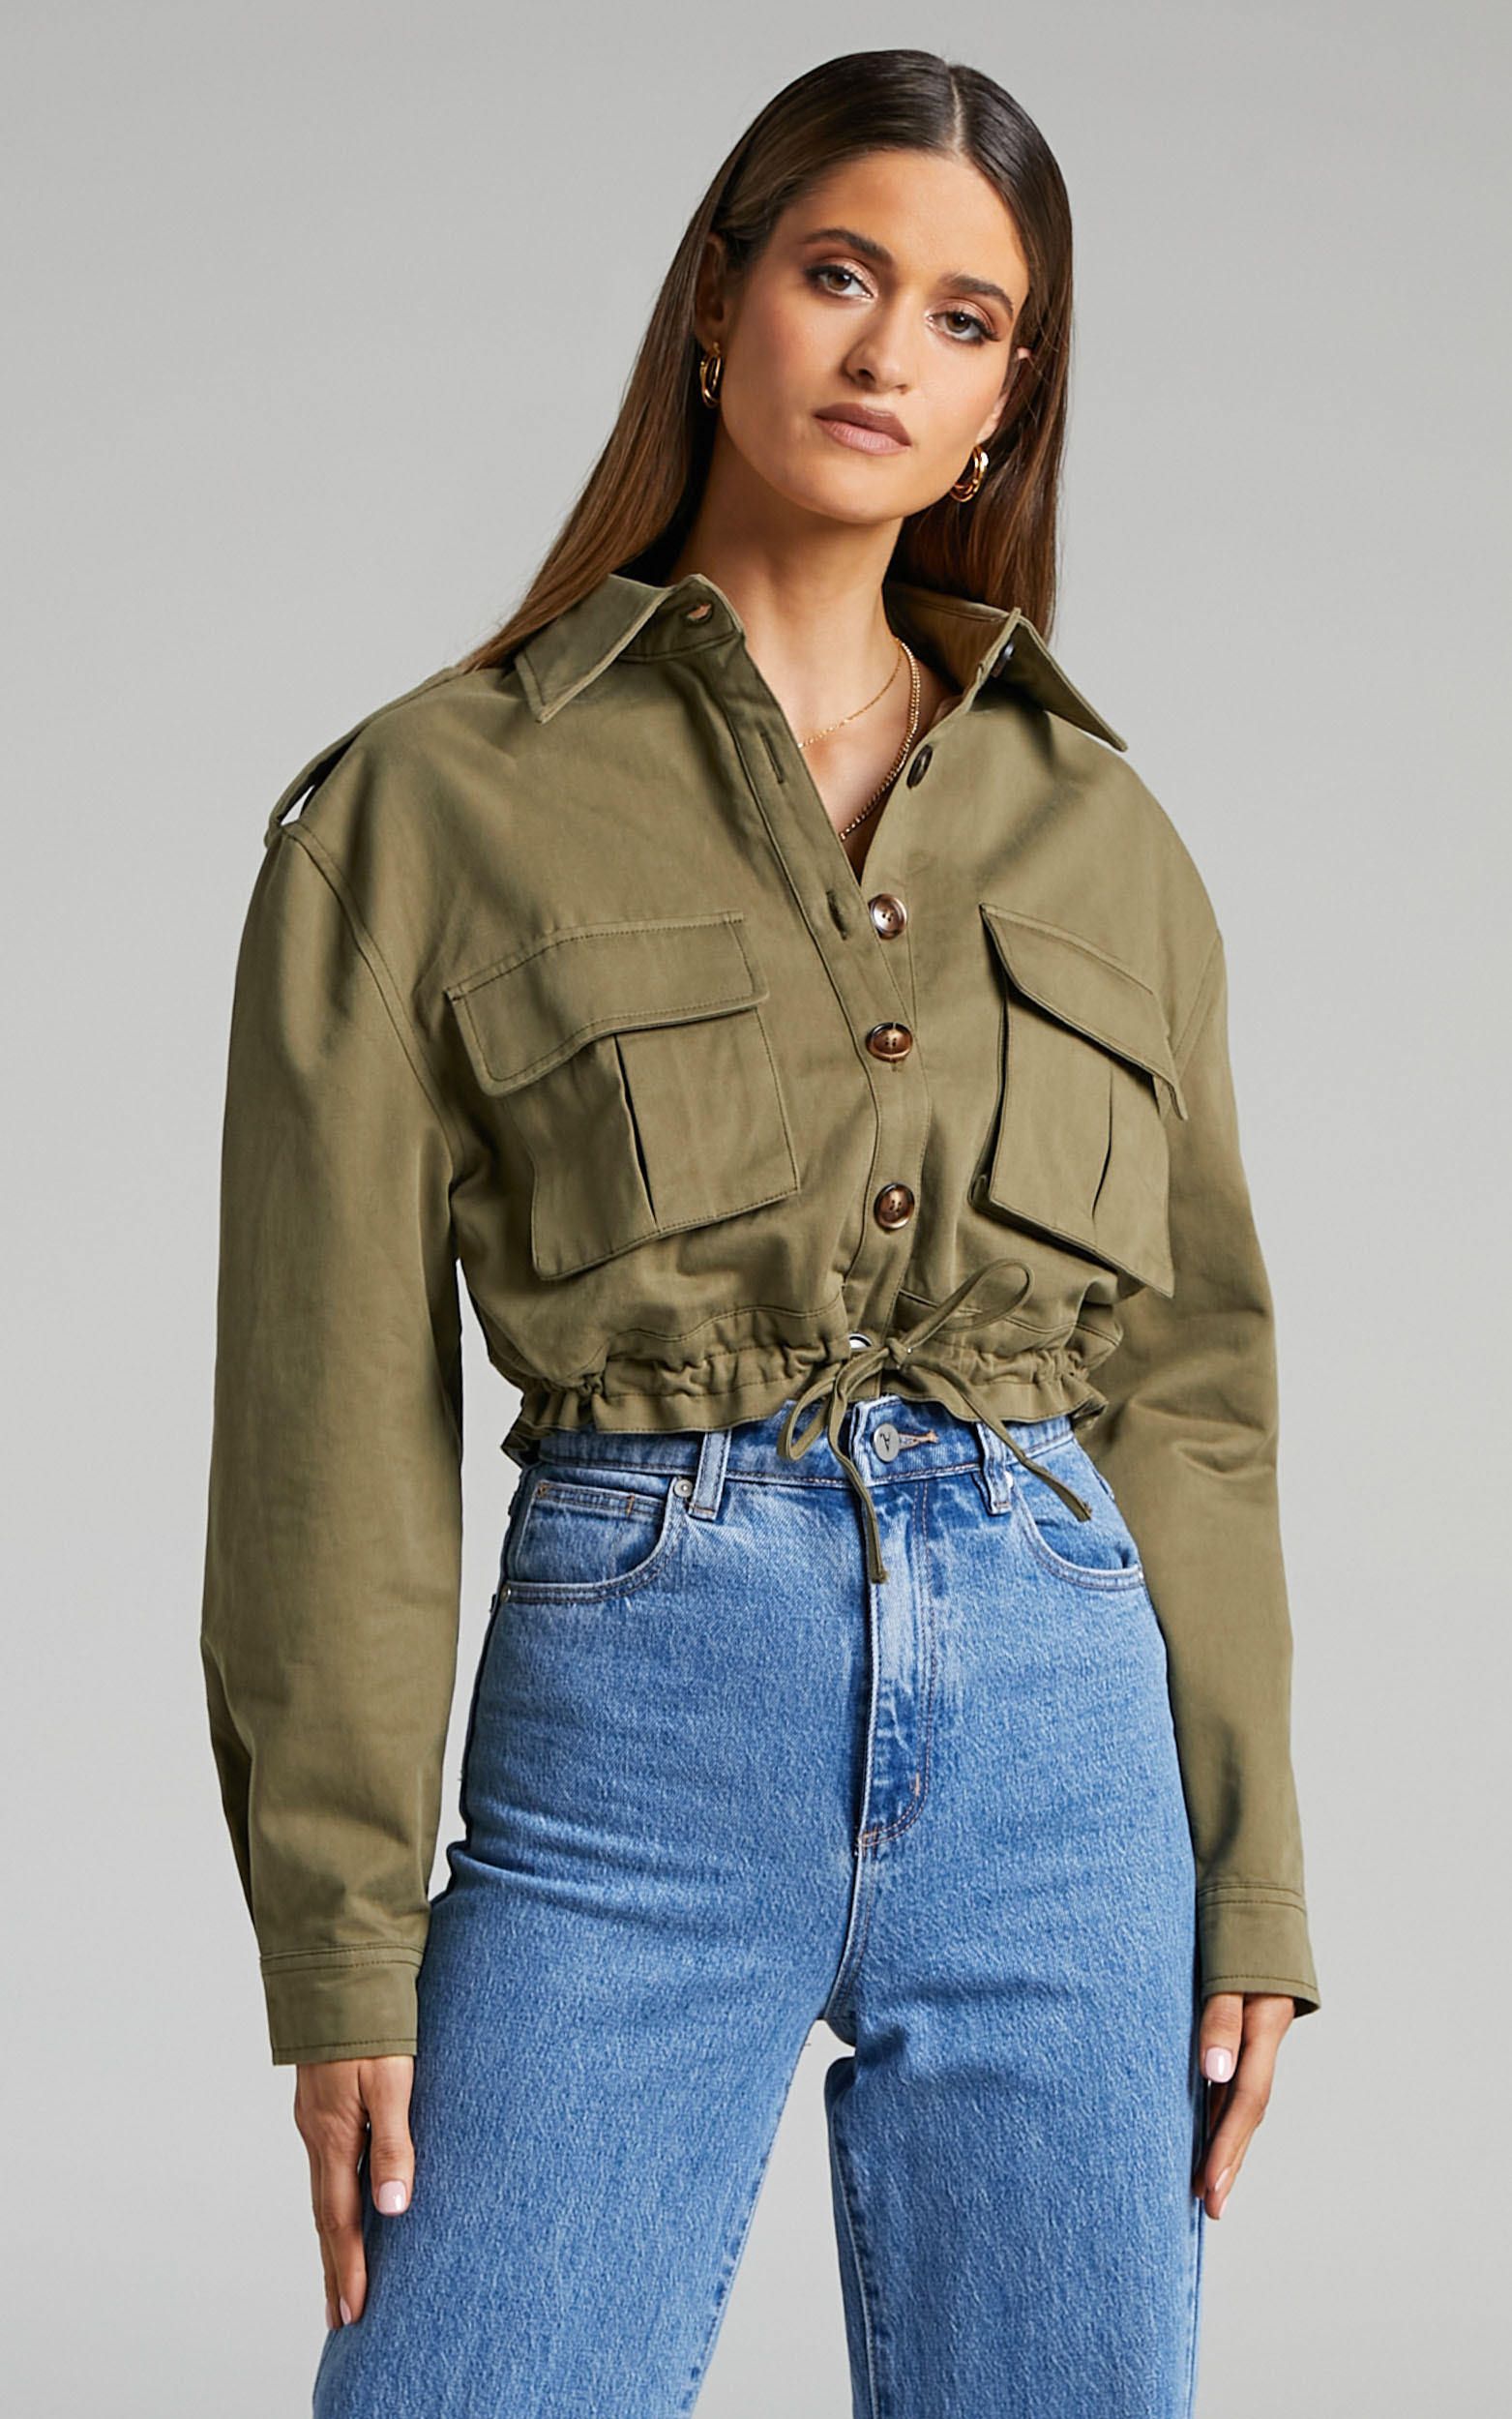 Karylle Cotton Cropped Utility Jacket in Khaki - 06, GRN1, hi-res image number null